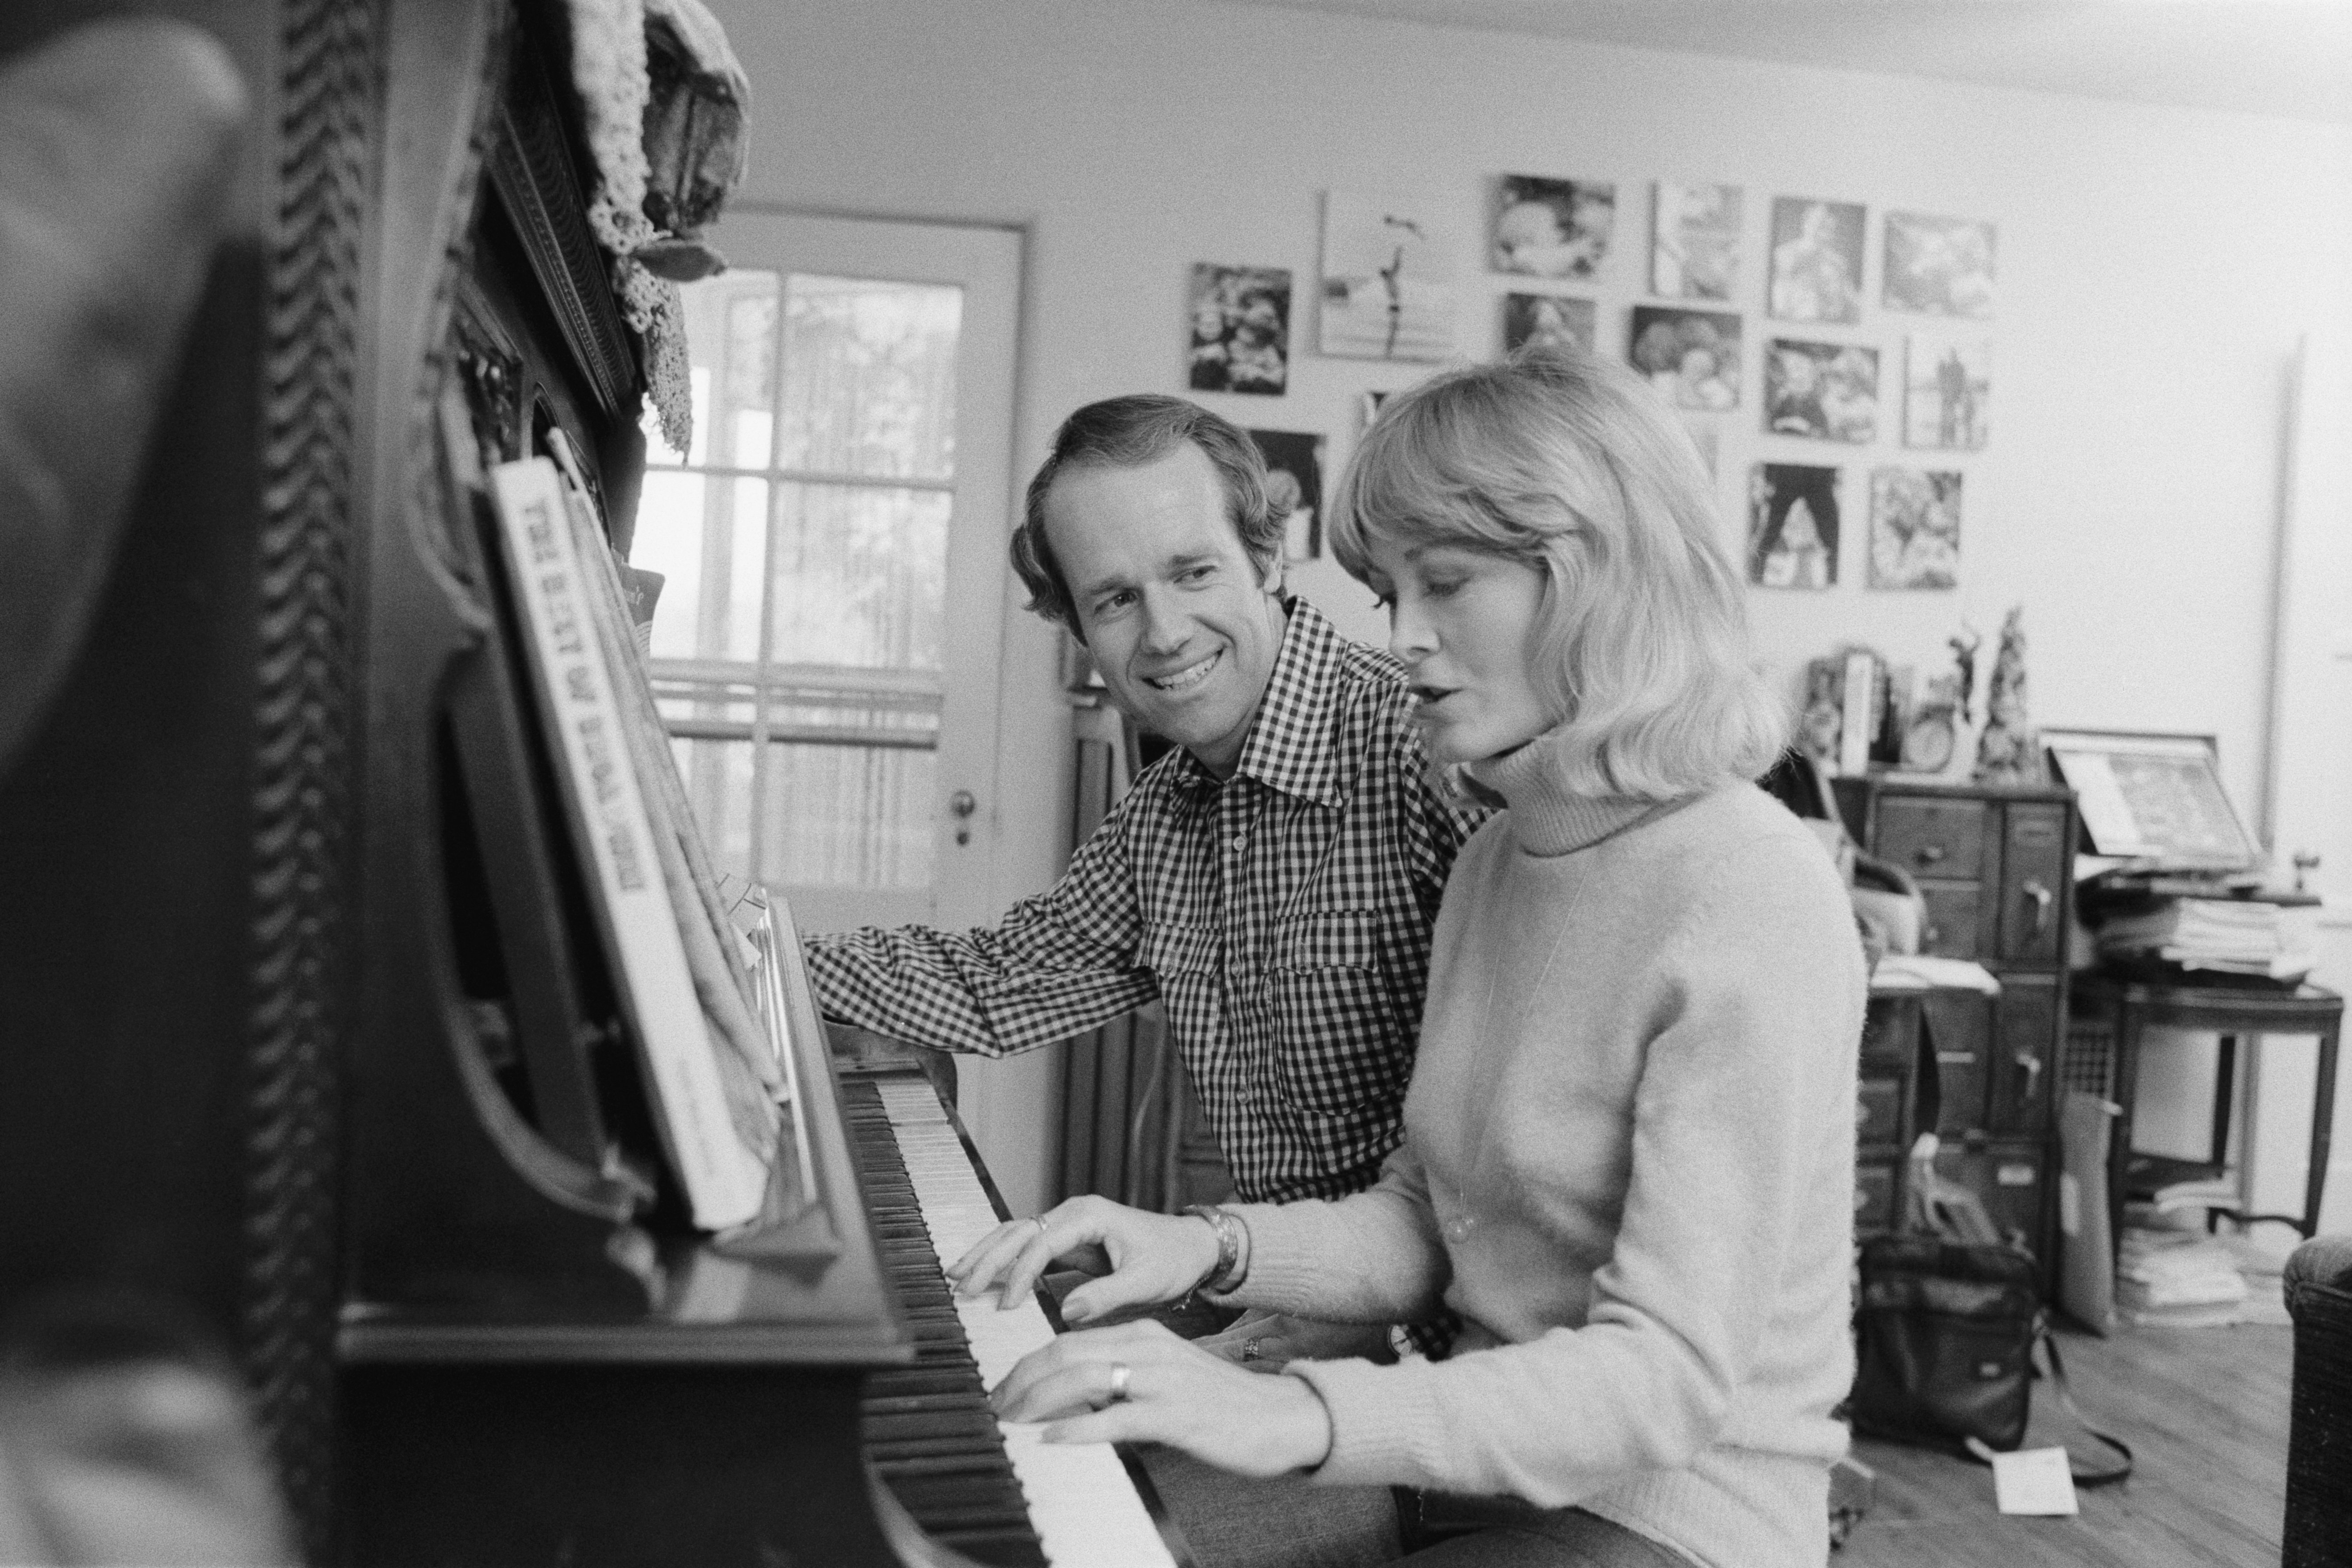 Mike Farrell pictured at home with his wife Judy Farrell playing the piano. | Source: Getty Images